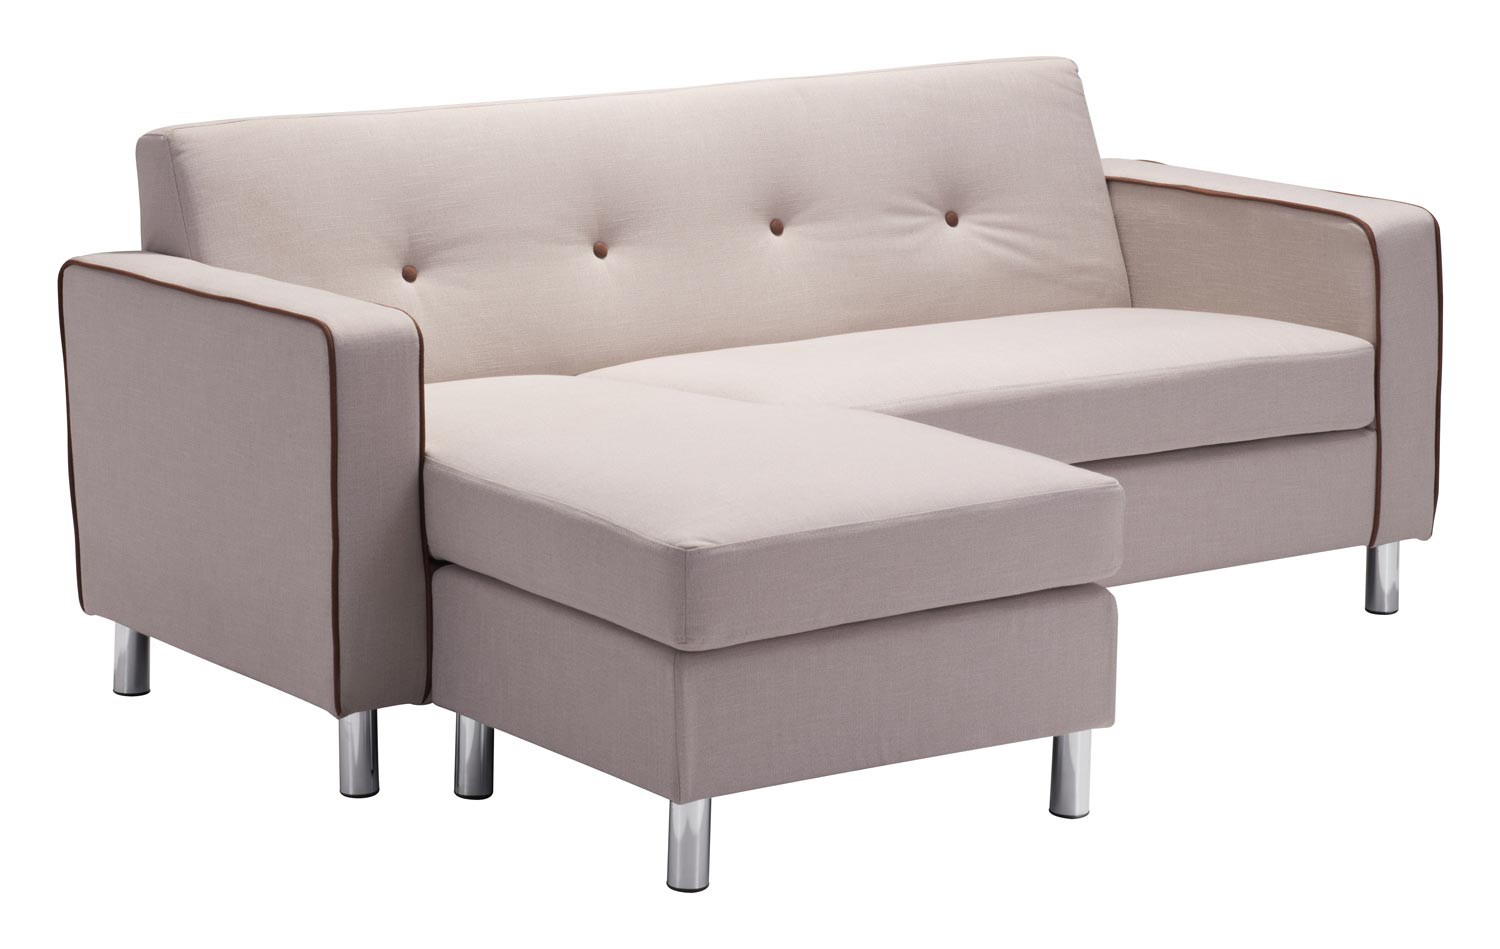 Zuo Modern Ovide Sectional - Beige with Espresso Piping